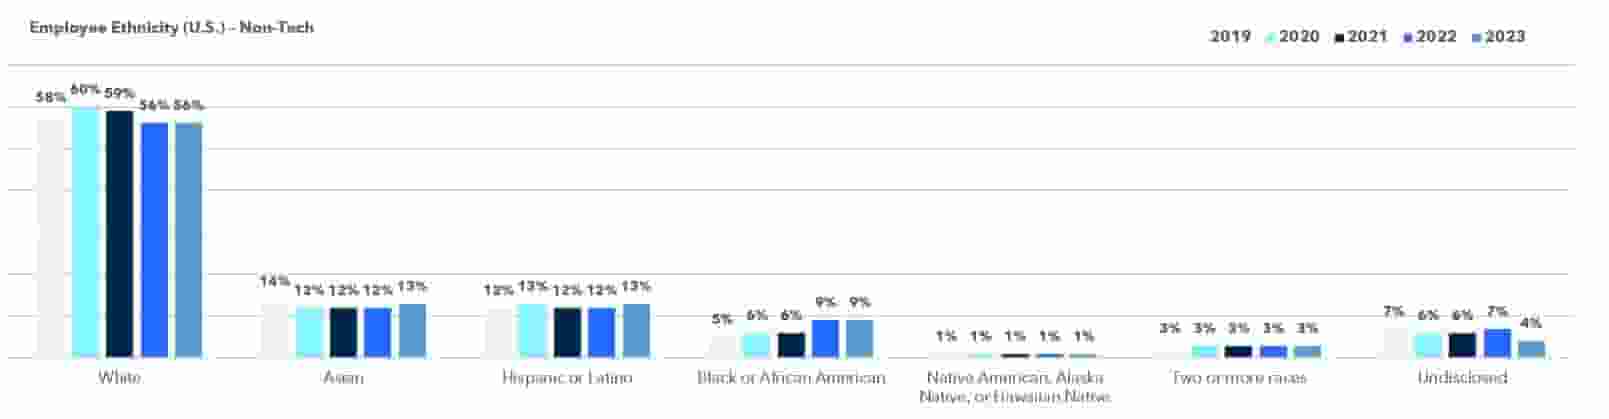 Overall Ethnicity Data in Non-Tech Roles for 2023